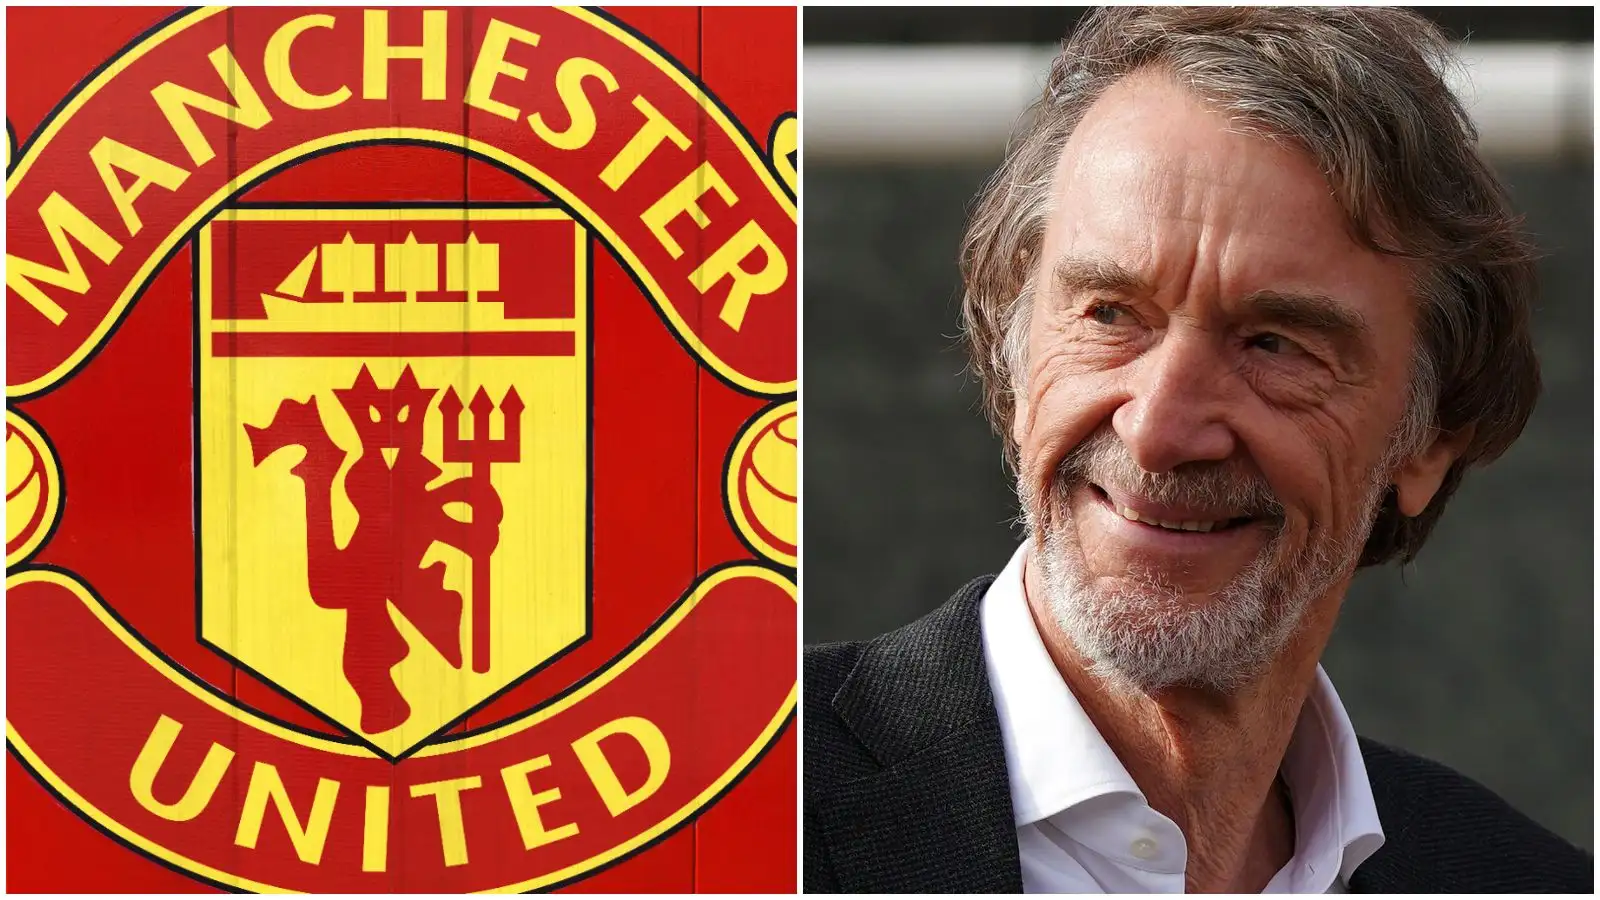 Sir Jim Ratcliffe via the Manchester Joined badge.